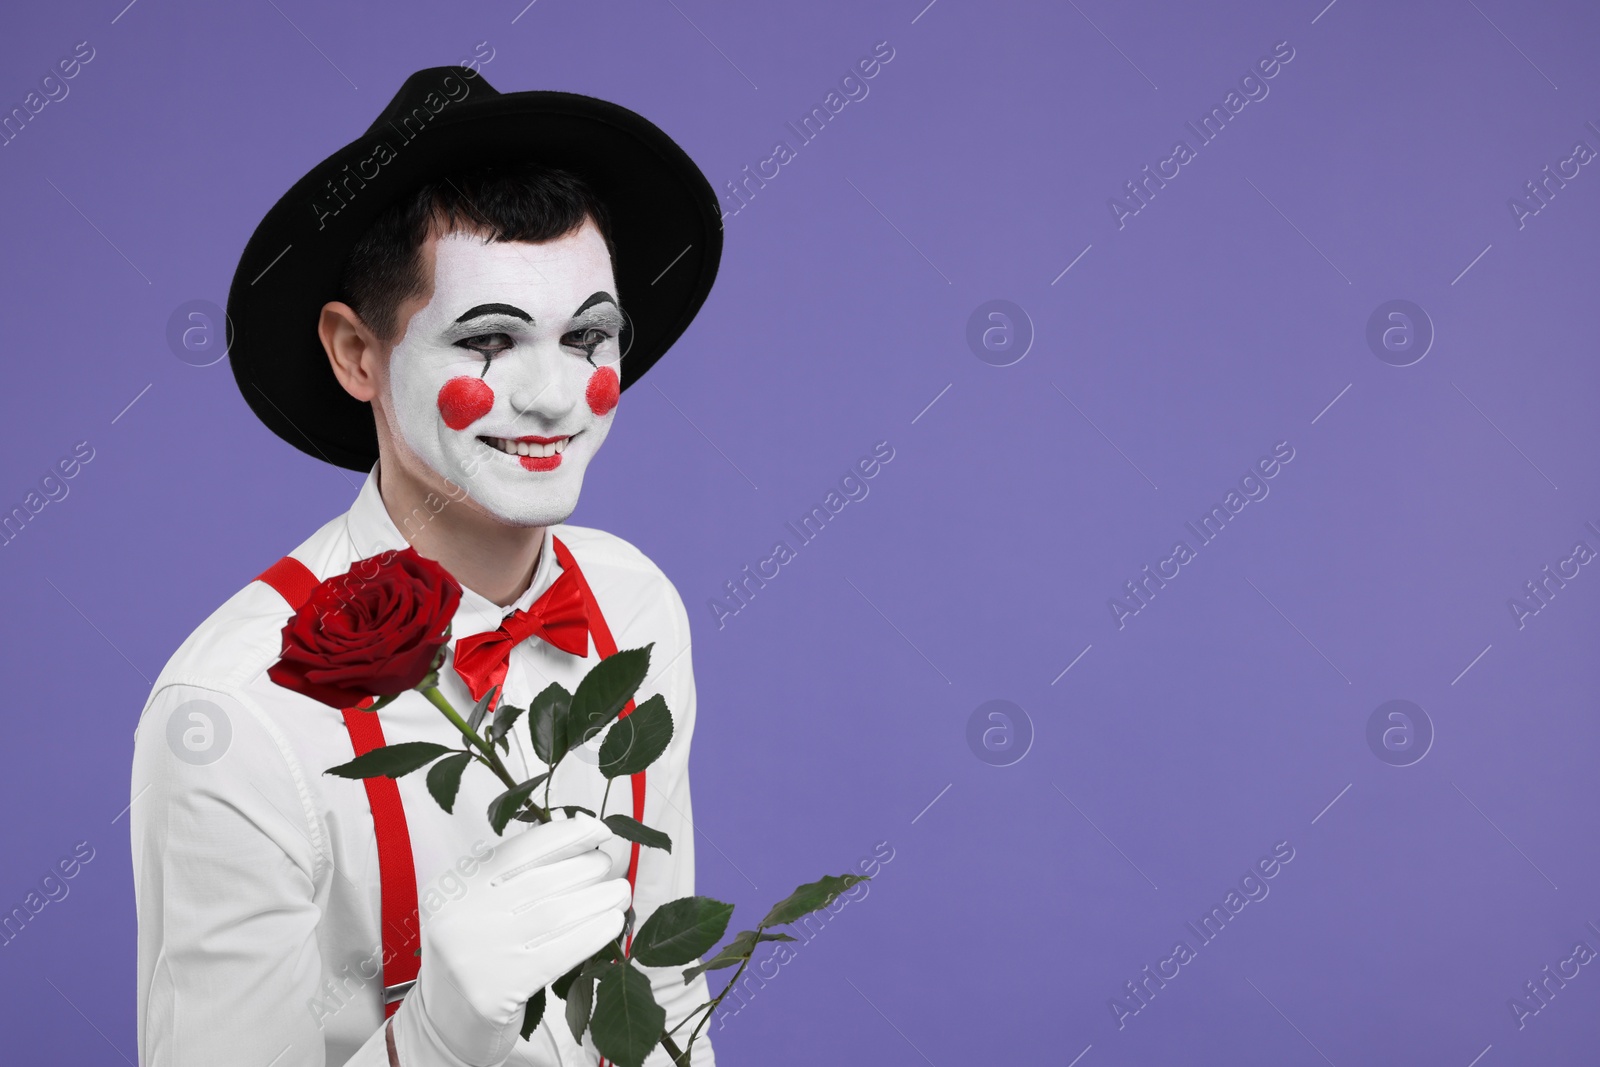 Photo of Funny mime artist with red rose on purple background. Space for text